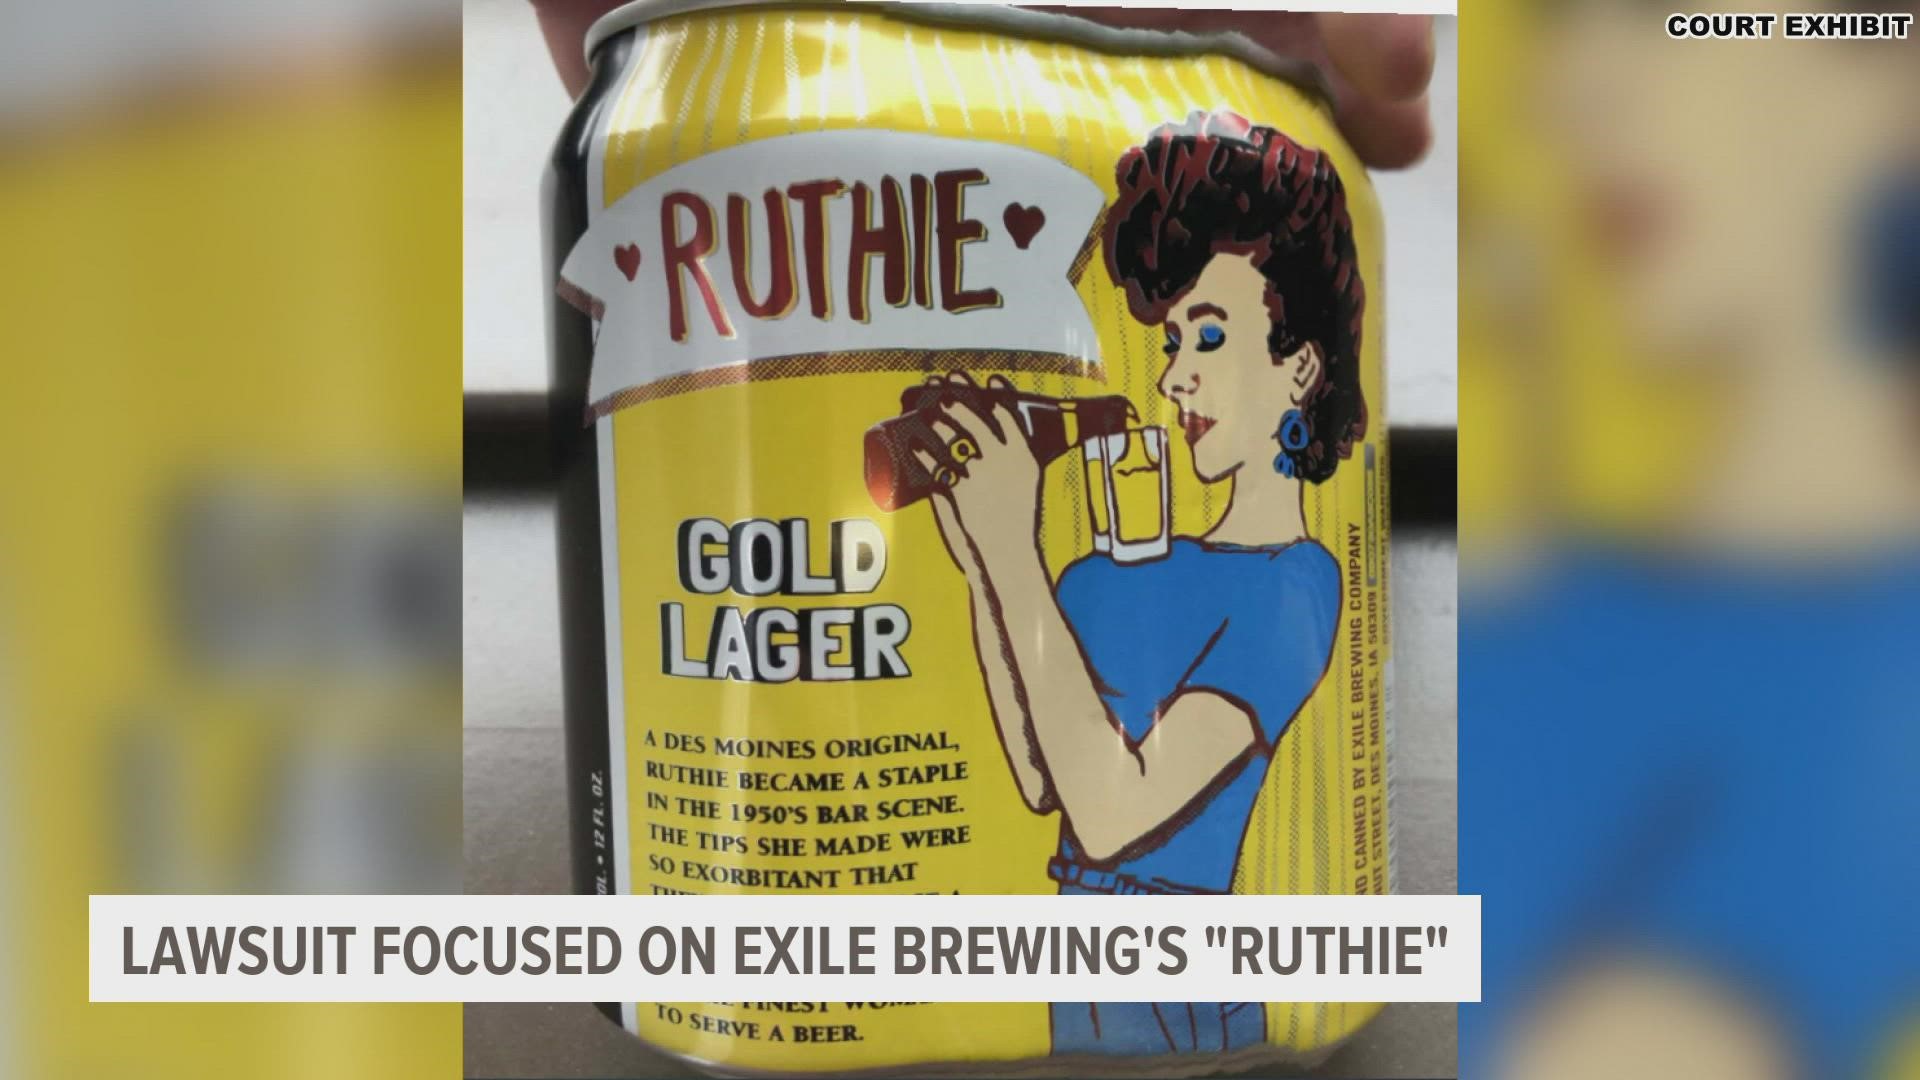 In 2020, years after Exile began brewing the lager, Ruthie Bisignano's nephew and administrator of her estate filed the lawsuit.